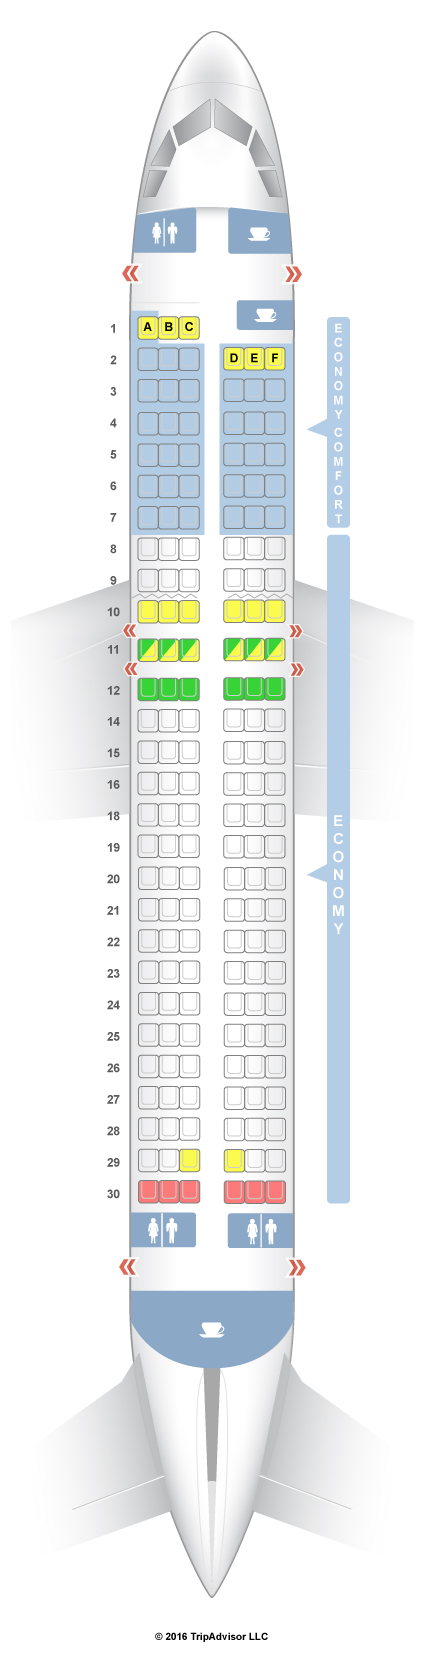 Airbus A320 United Airlines Seating Chart